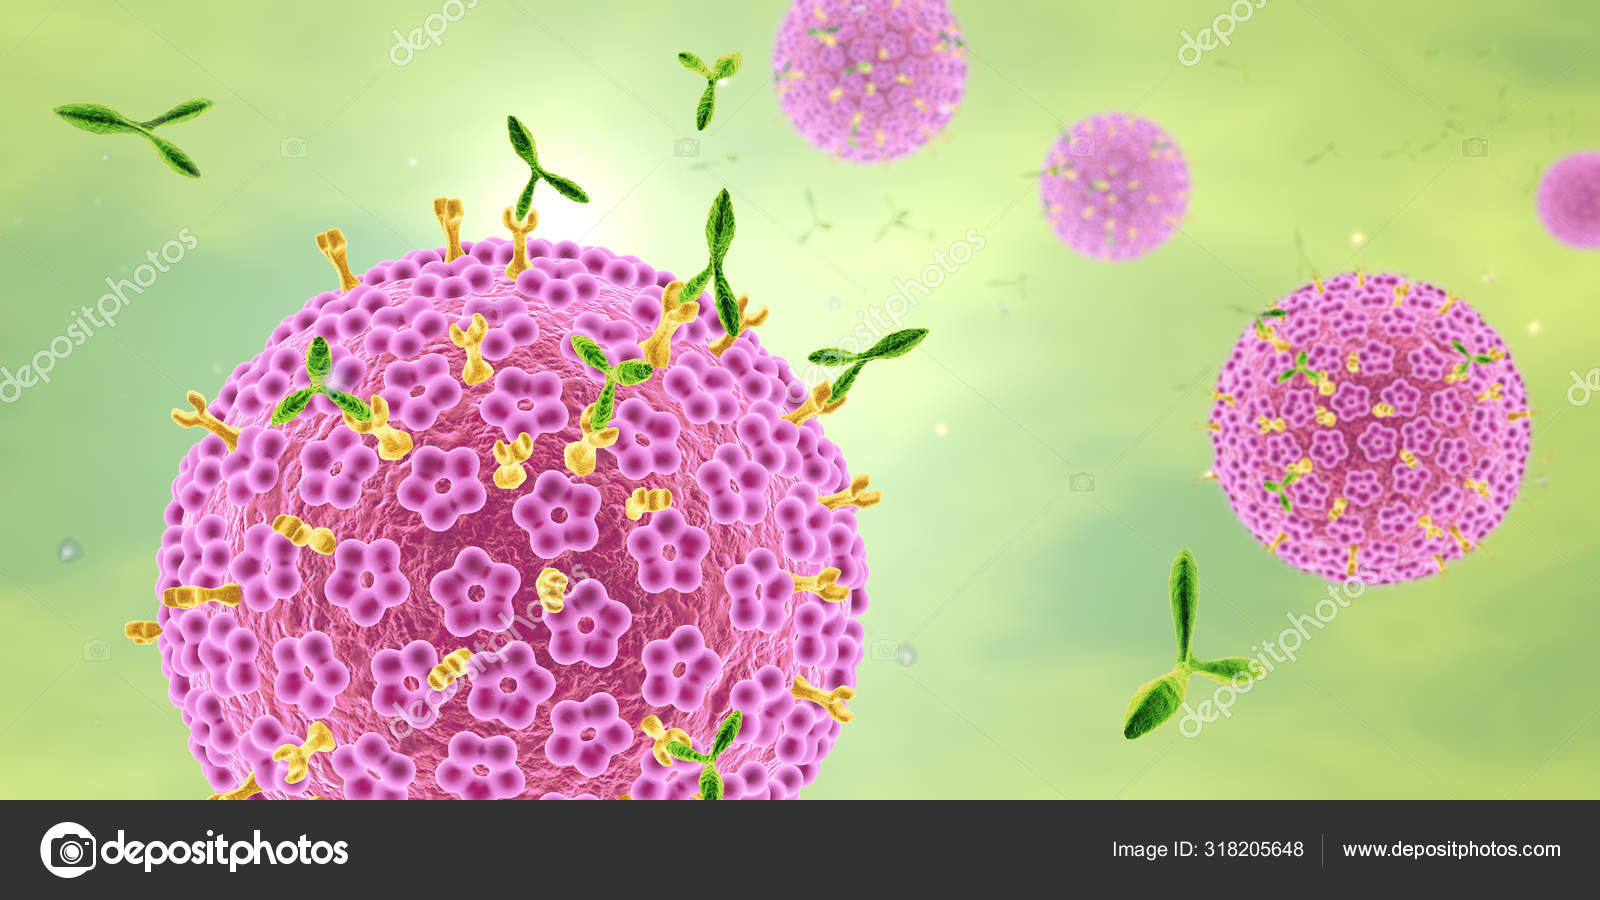 Hpv viral or bacterial. Infectii cu transmitere sexuala (ITS) | csrb.ro